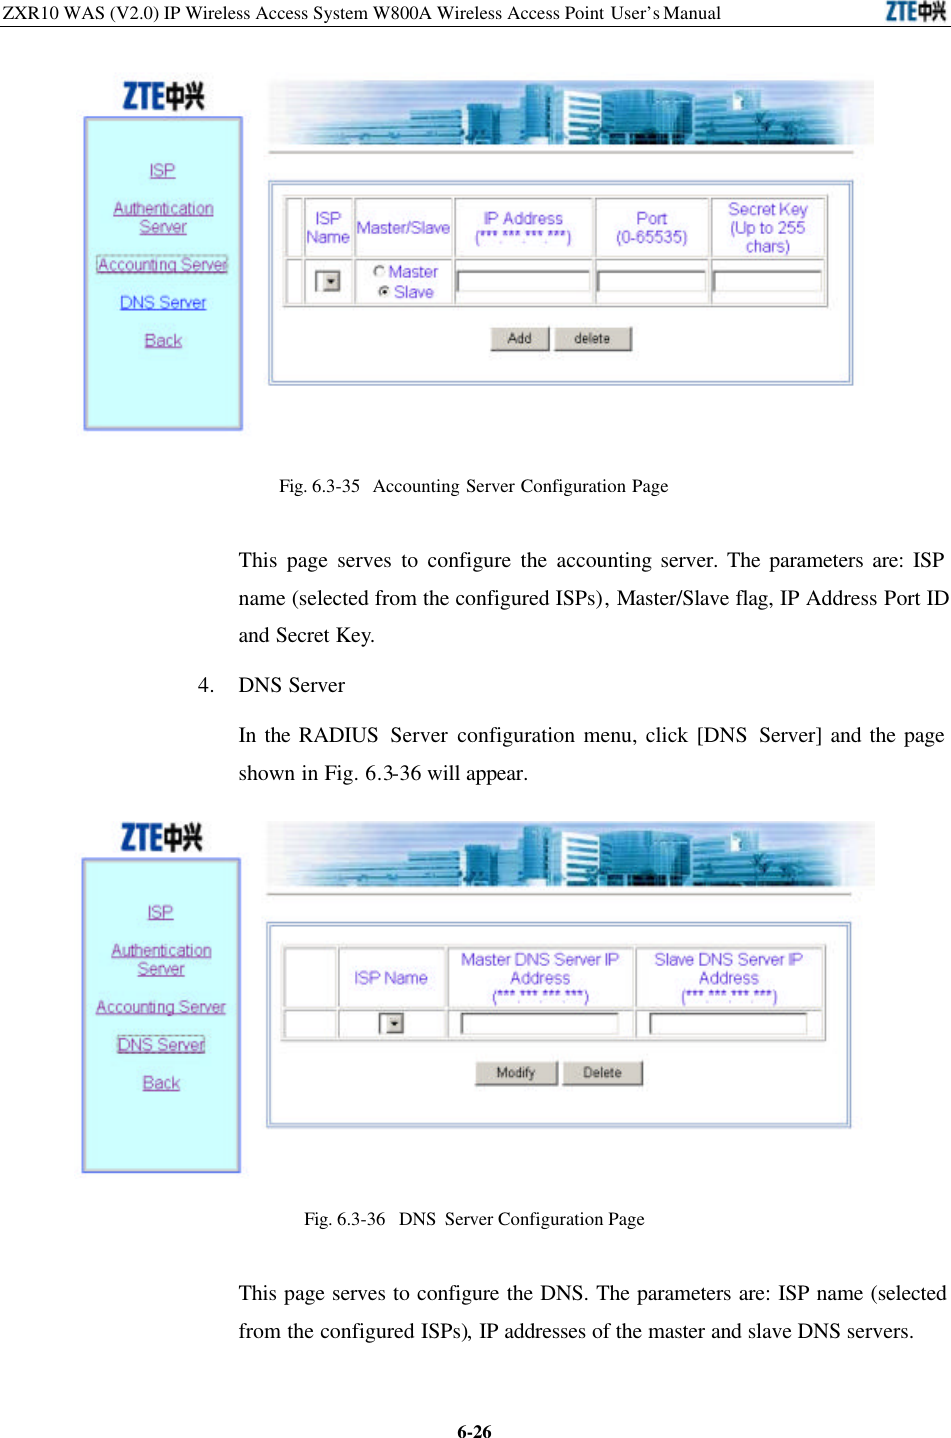 ZXR10 WAS (V2.0) IP Wireless Access System W800A Wireless Access Point User’s Manual  6-26 Fig. 6.3-35  Accounting Server Configuration Page   This page serves to configure the accounting server. The parameters are: ISP name (selected from the configured ISPs), Master/Slave flag, IP Address Port ID and Secret Key. 4.  DNS Server In the RADIUS Server configuration menu, click [DNS Server] and the page shown in Fig. 6.3-36 will appear.    Fig. 6.3-36  DNS Server Configuration Page   This page serves to configure the DNS. The parameters are: ISP name (selected from the configured ISPs), IP addresses of the master and slave DNS servers.   